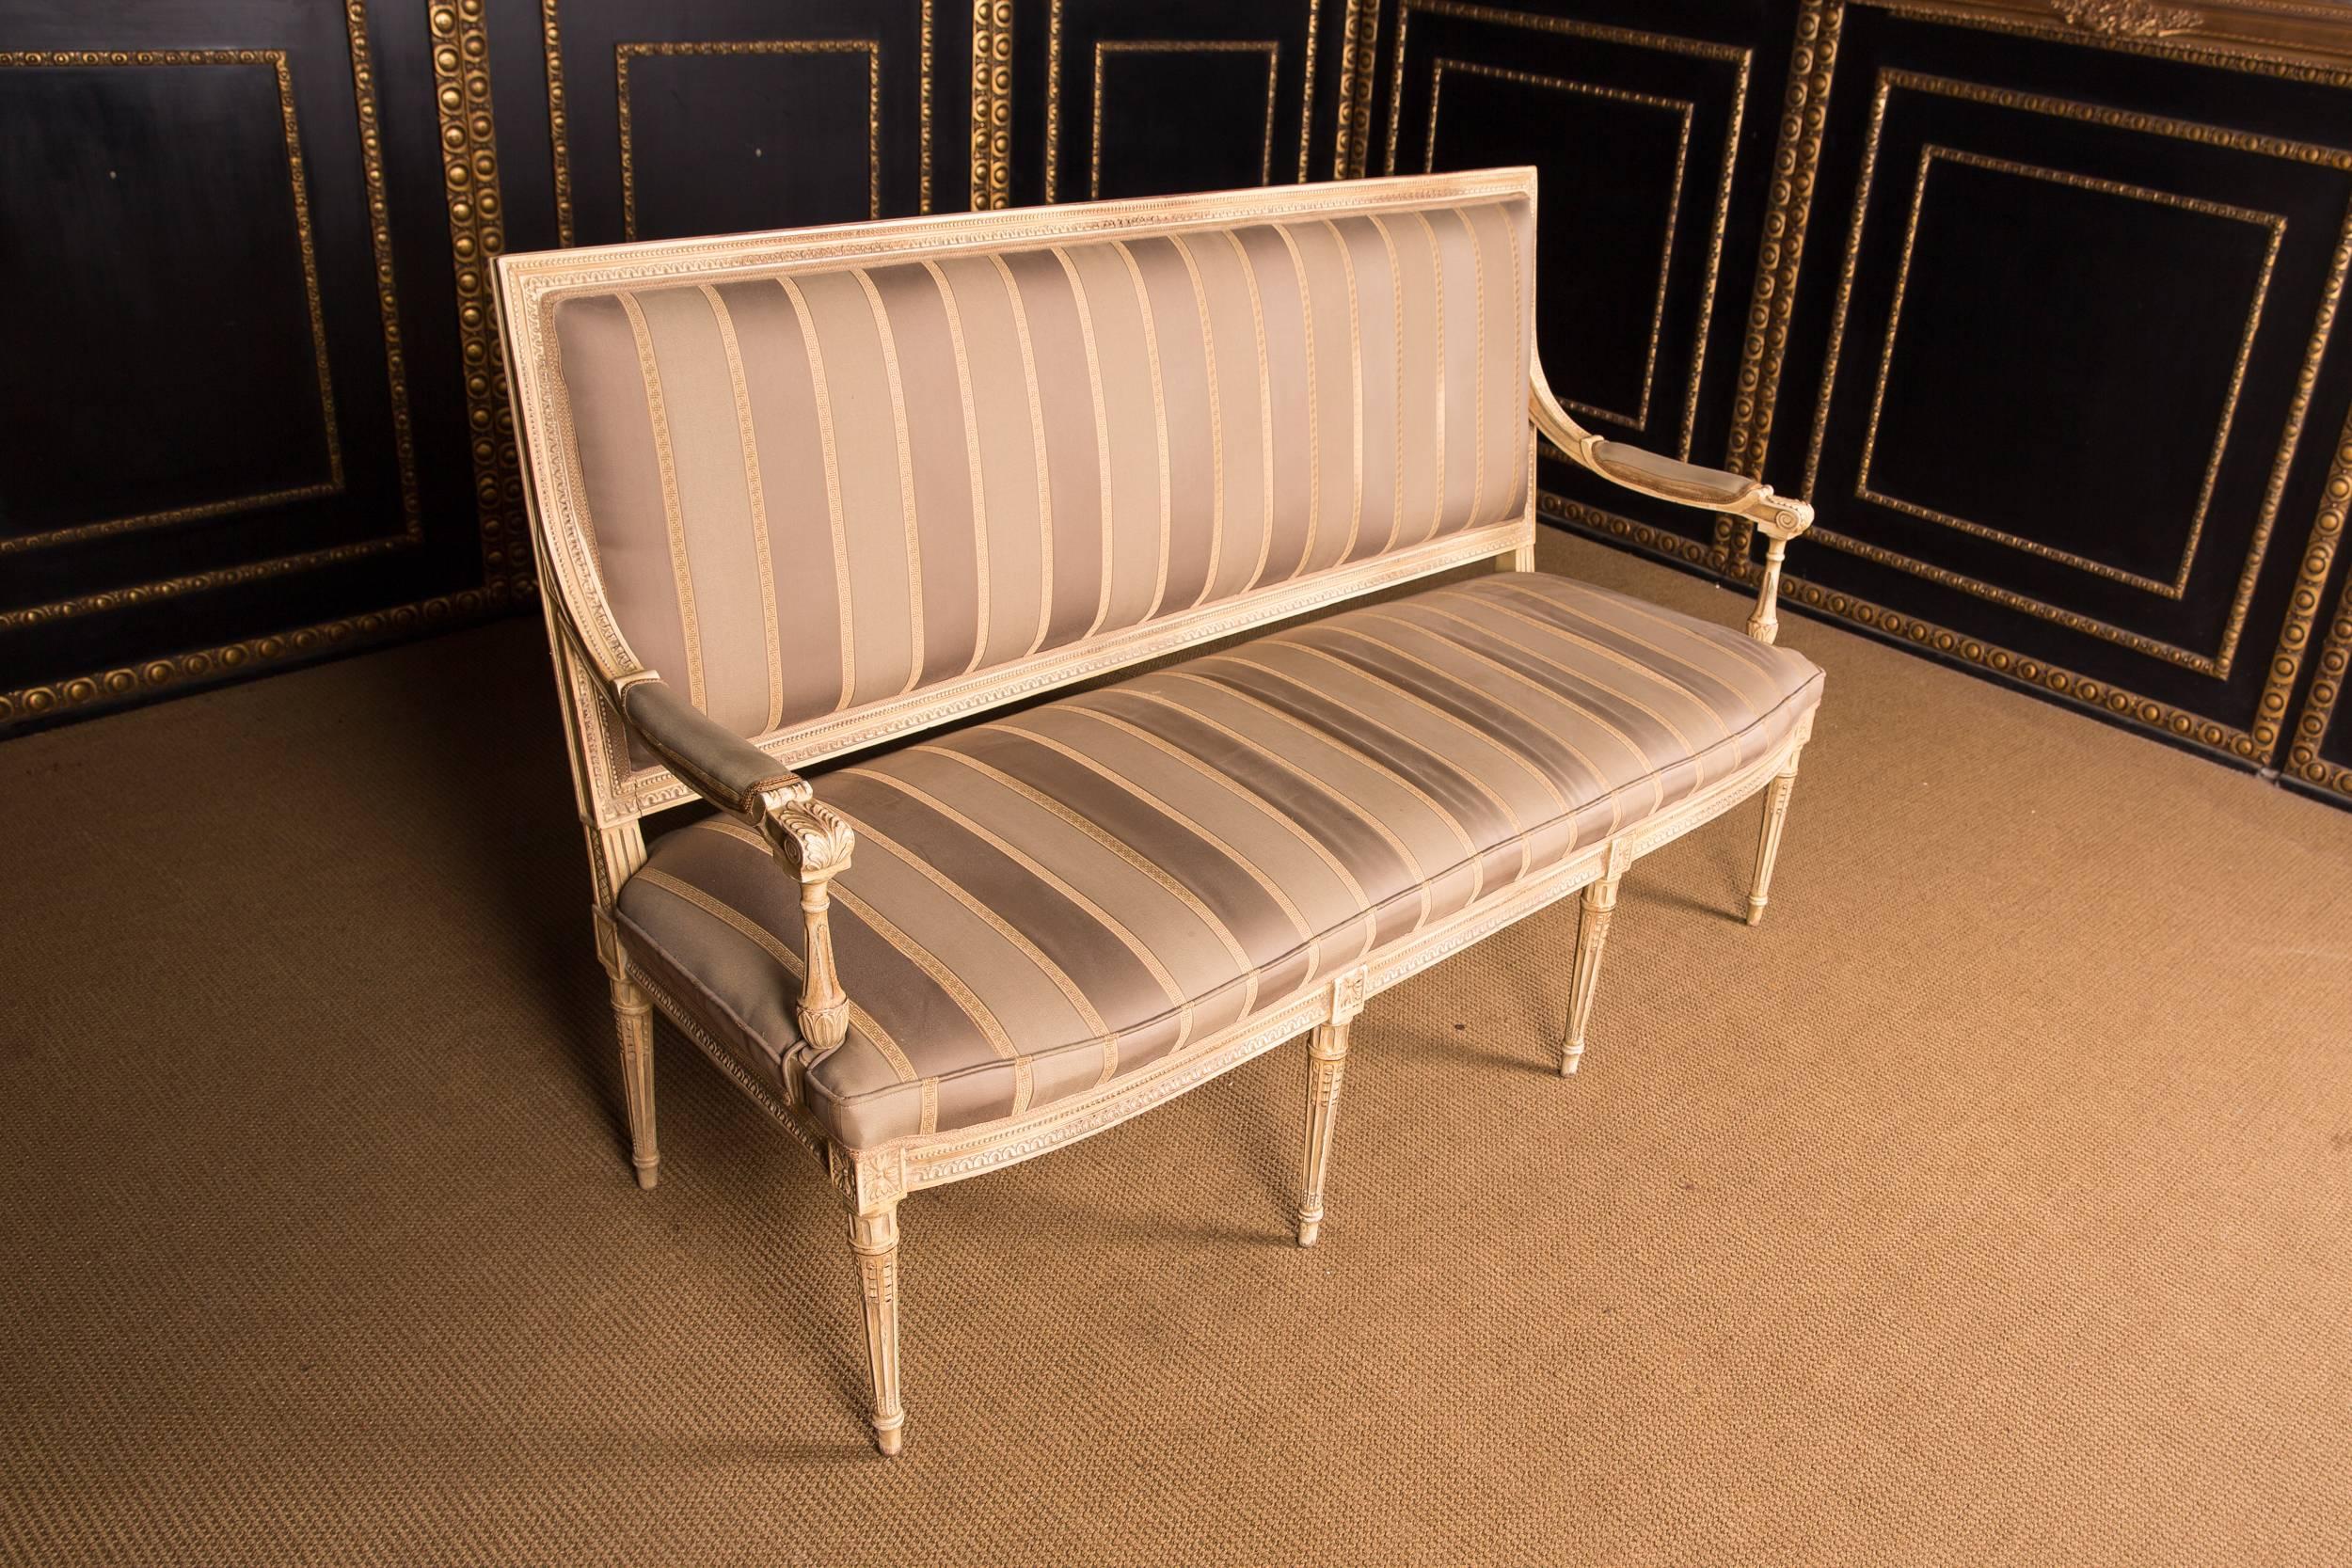 Hand-Carved High Quality Seating Furniture Suite and Two Armchairs in the Louis Seize Style